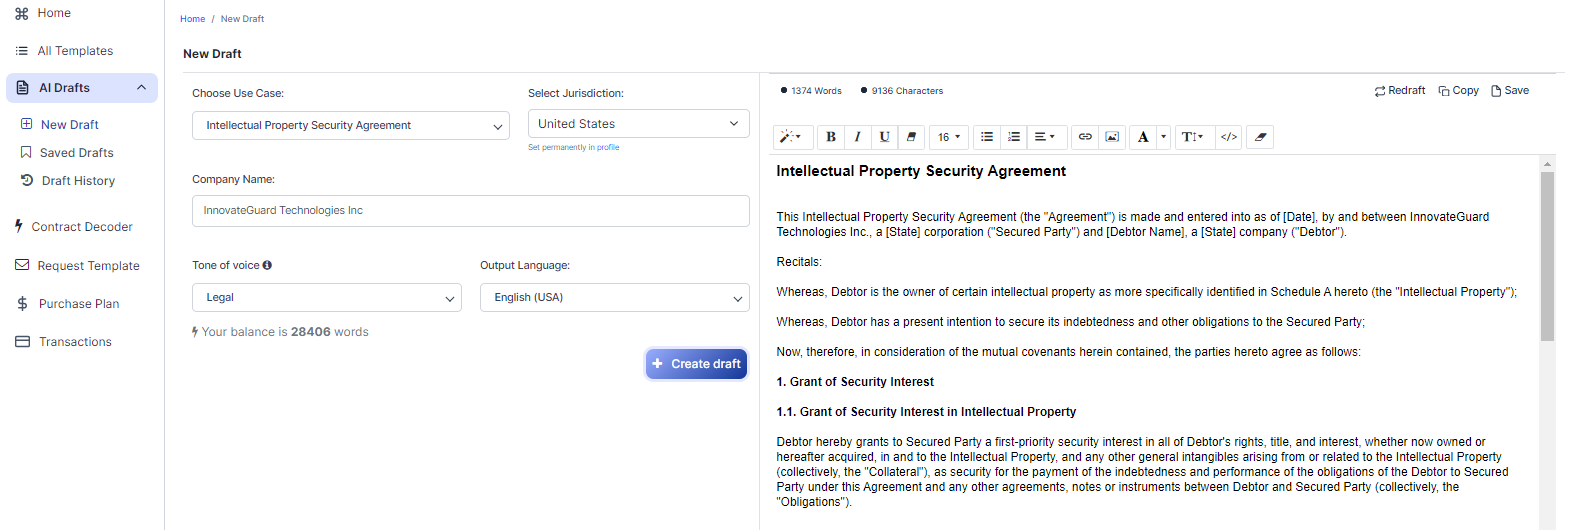 Intellectual Property Security Agreement template